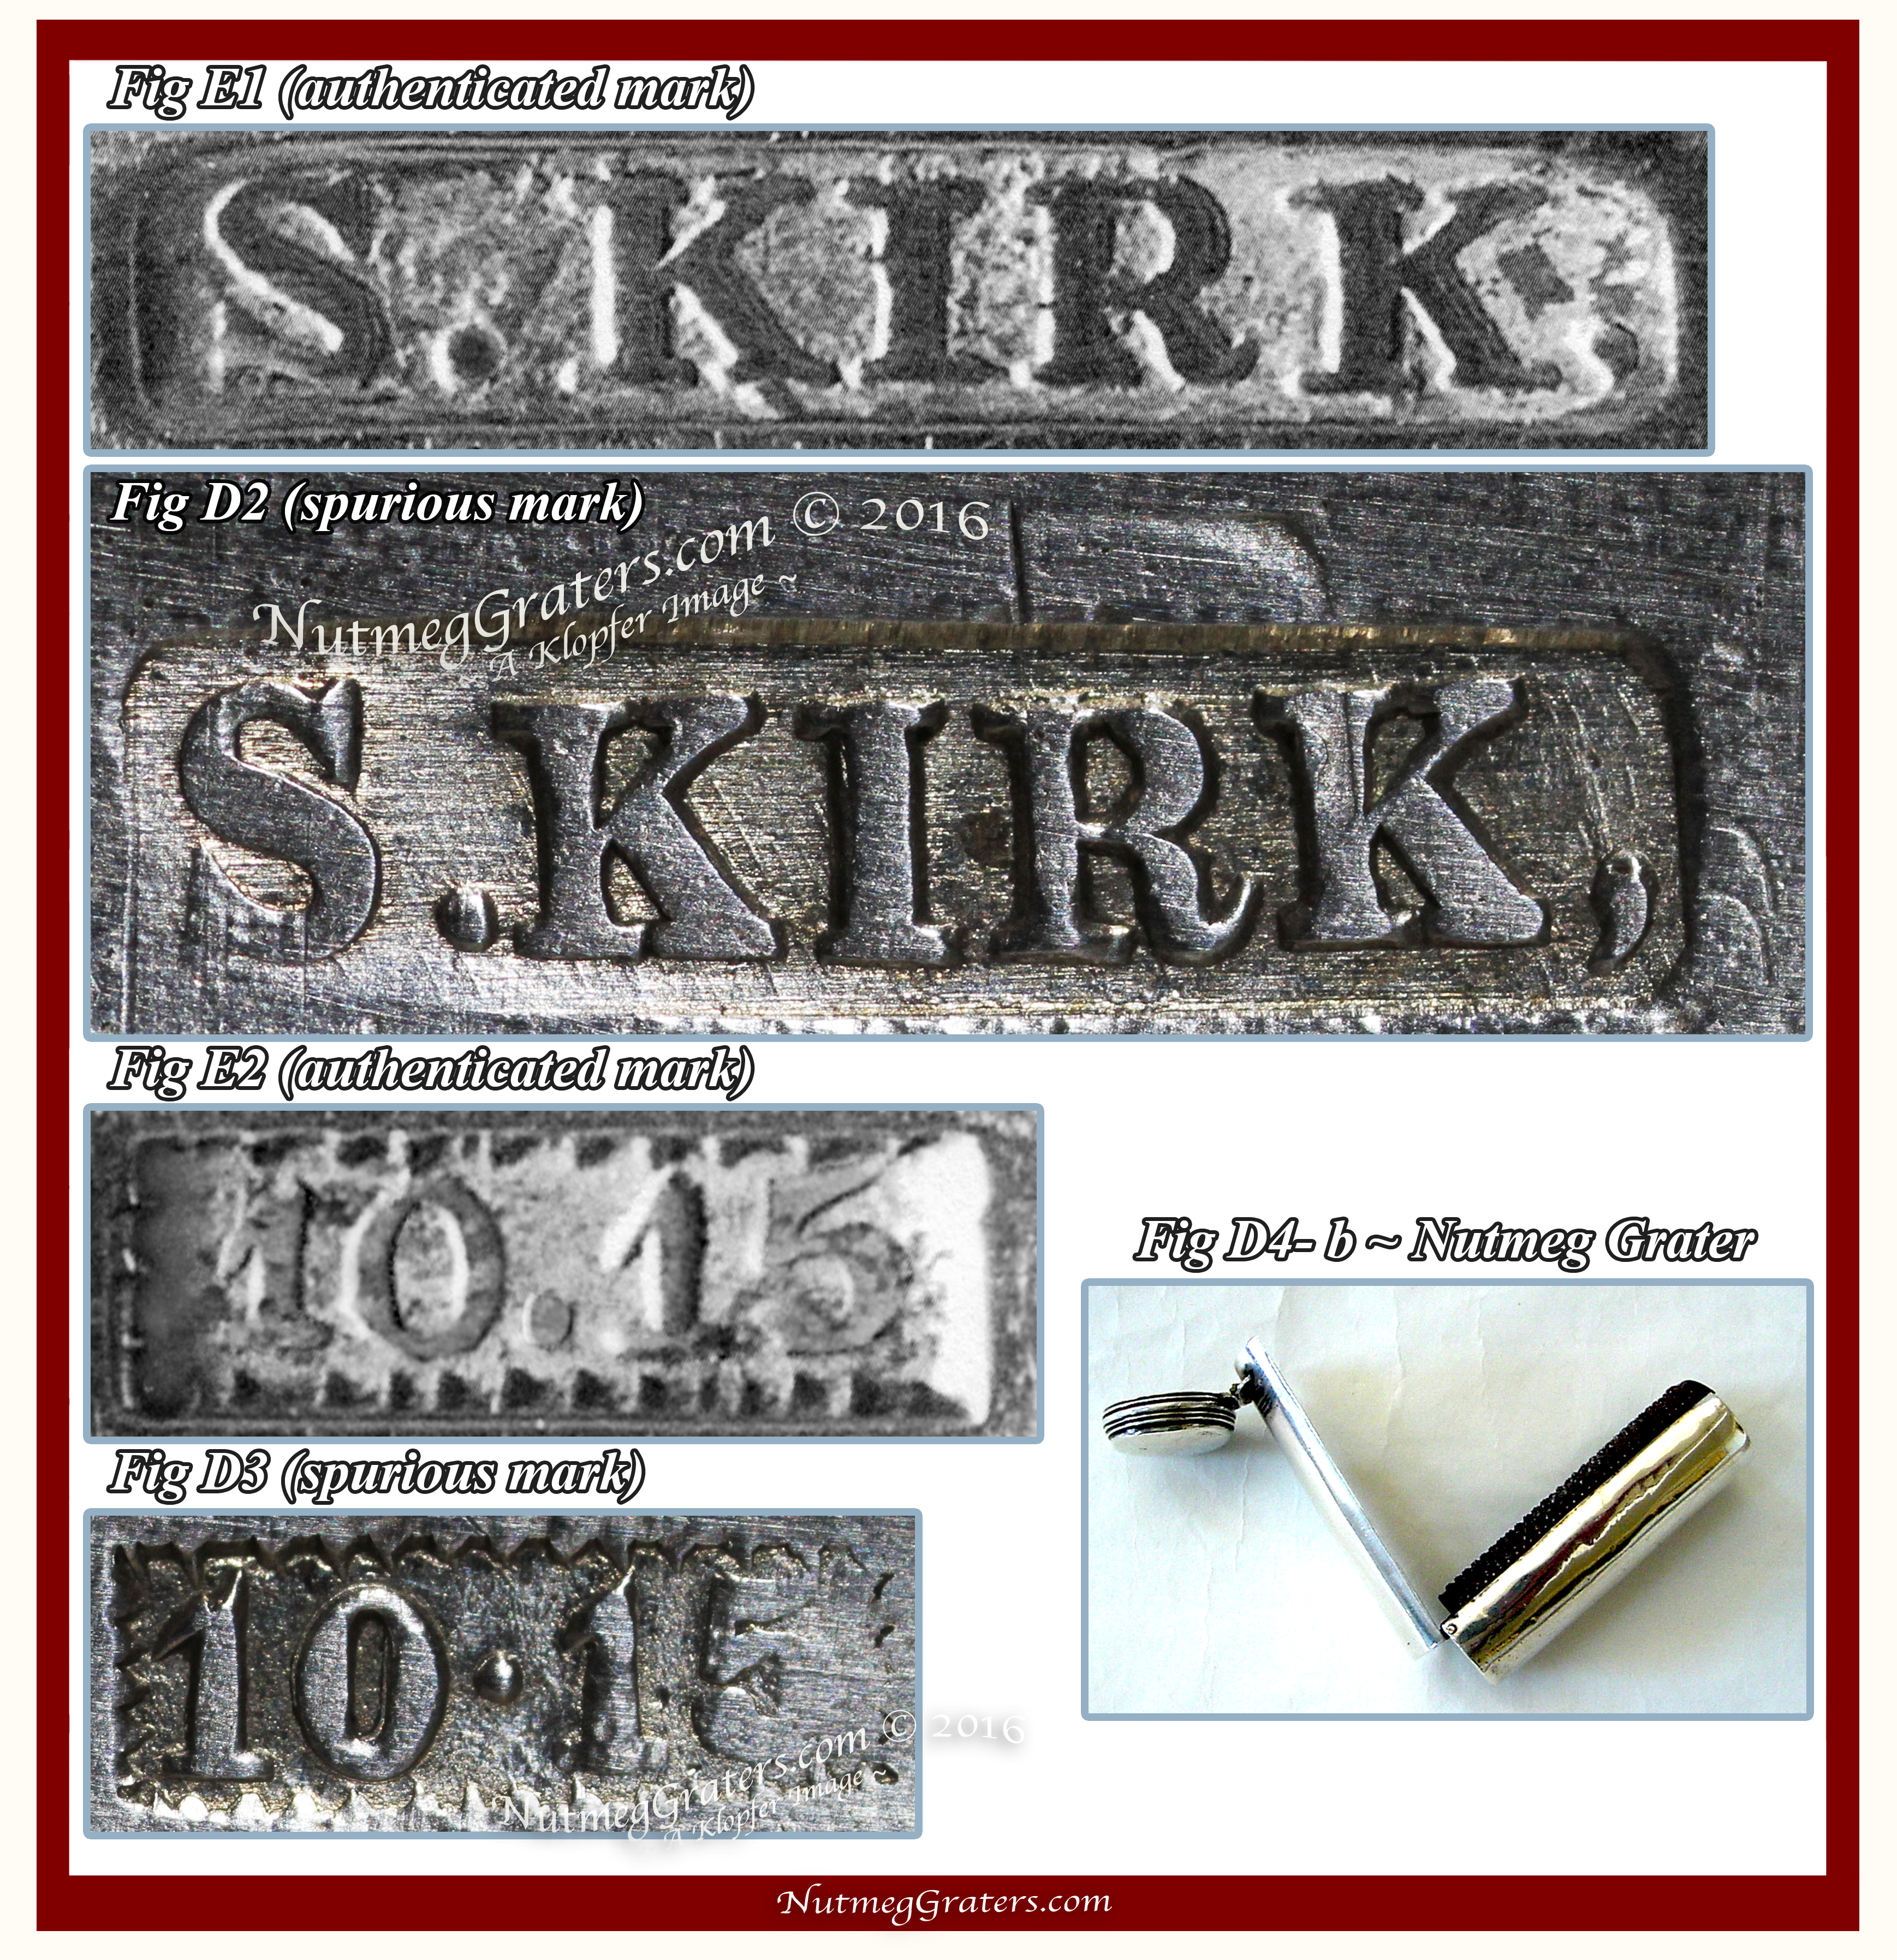 Comparison of Authenticated VS Spurious Kirk maker's mark